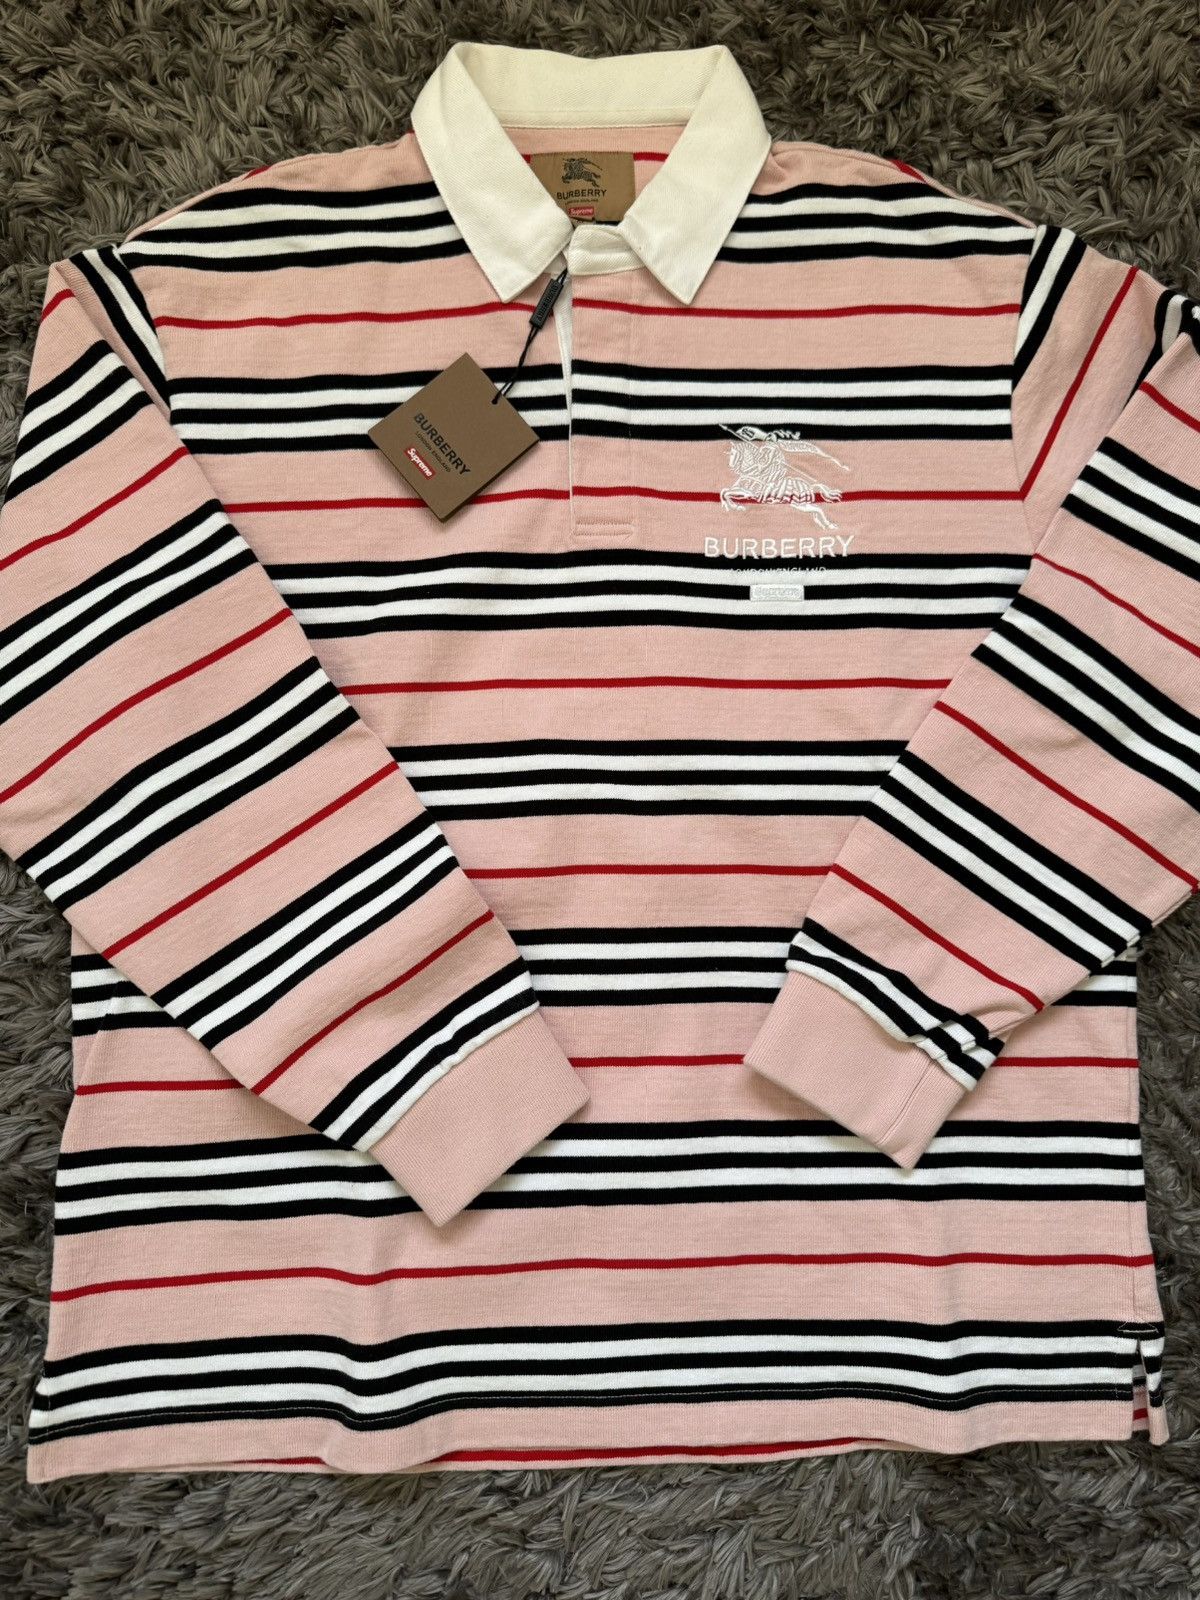 Supreme Burberry Rugby | Grailed